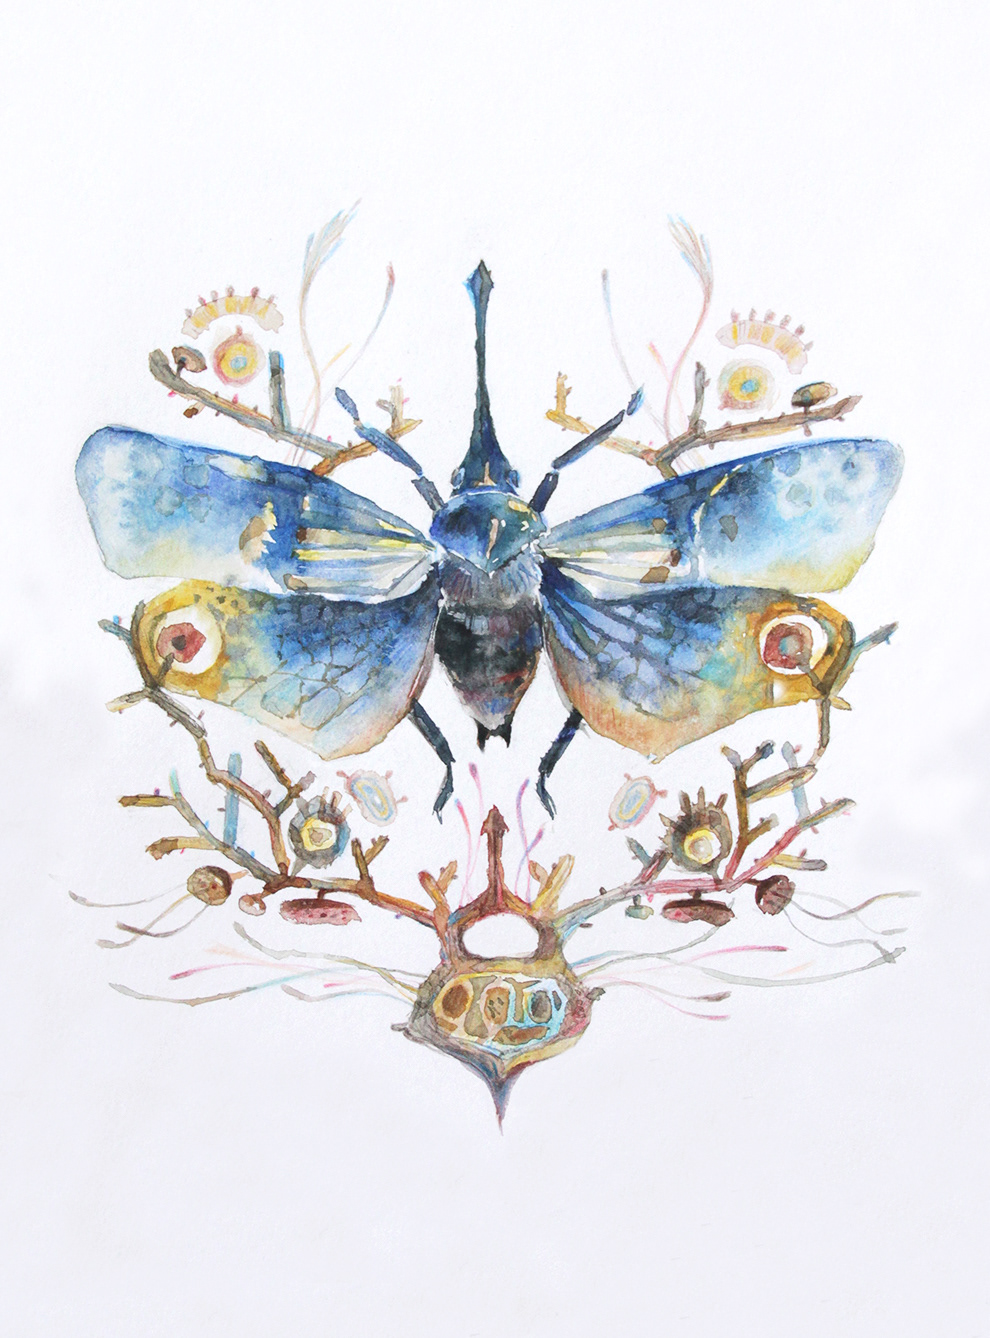 beetles Mushrooms aquarelle Patterns Nature Flora and Fauna watercolor butterfly handdrawing